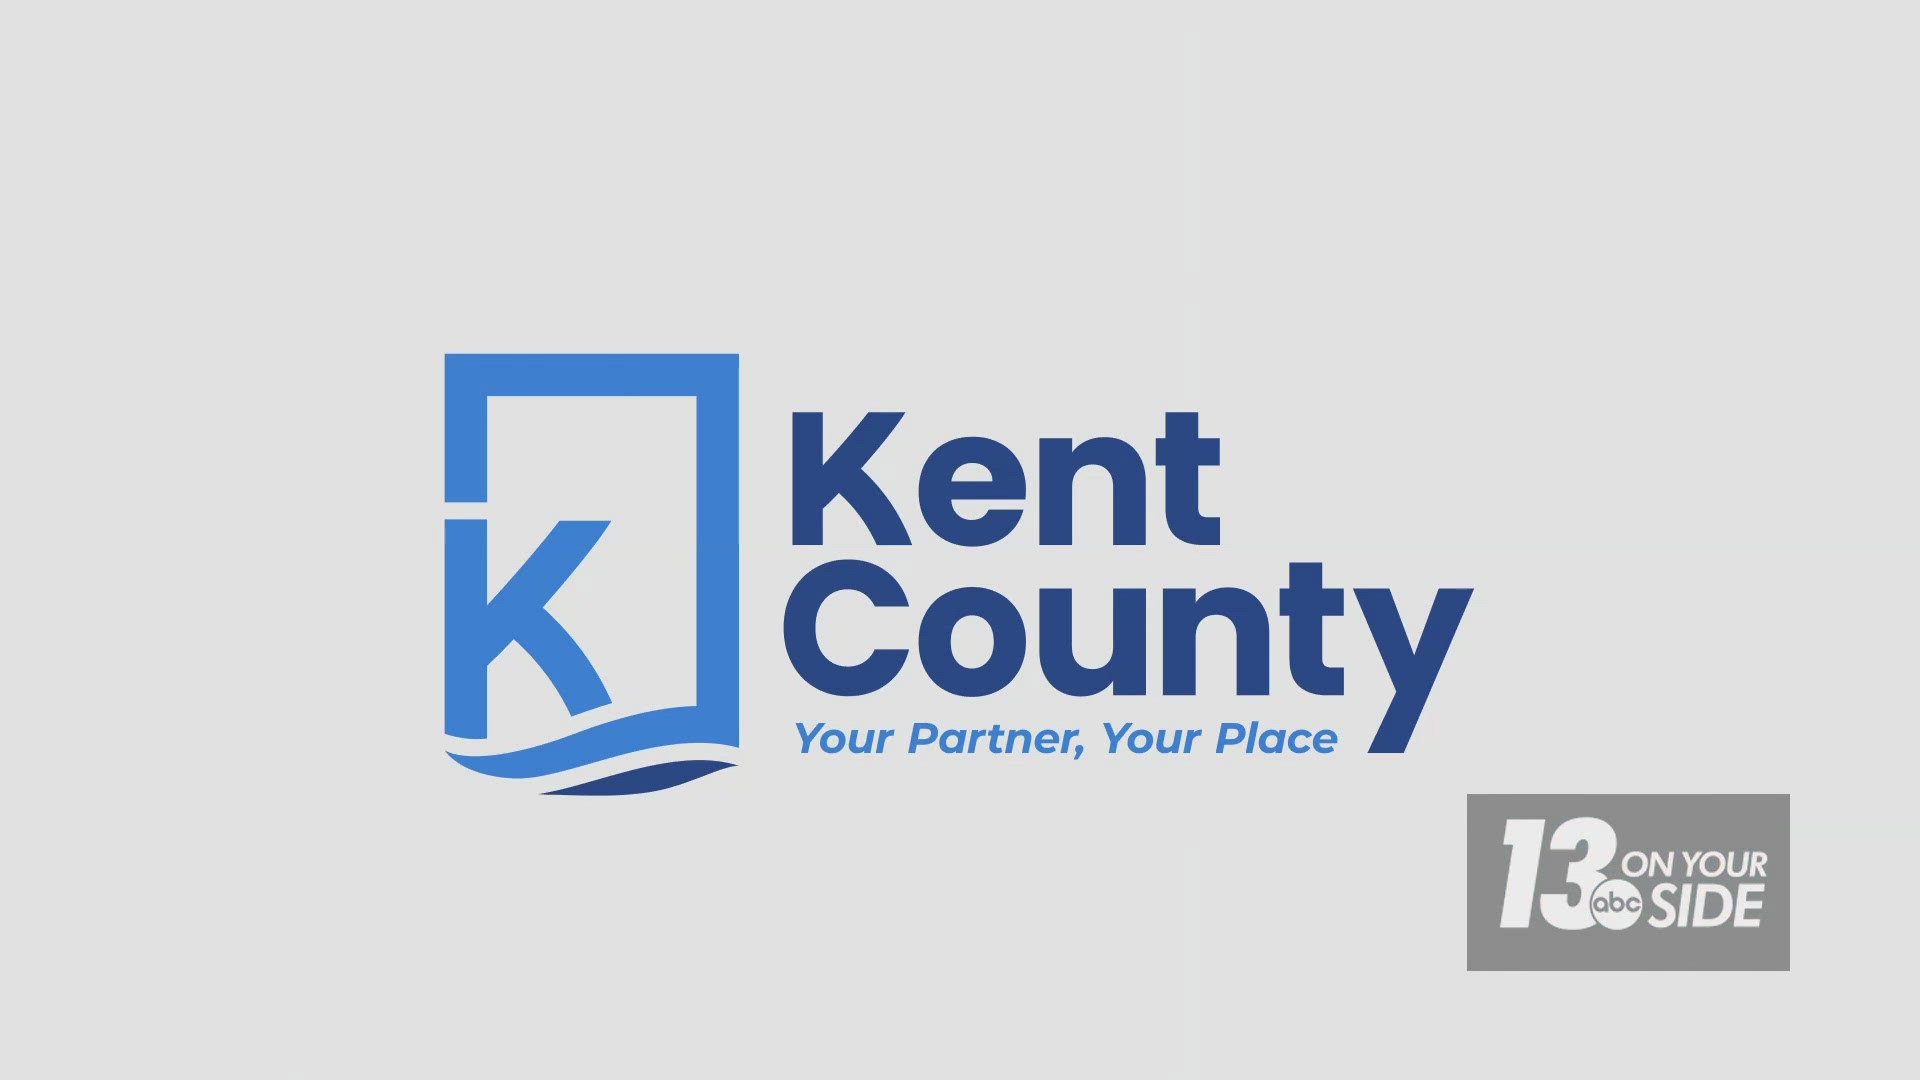 There are benefits to working for local government and Kent County is pulling out all the stops to be sure folks know about them.